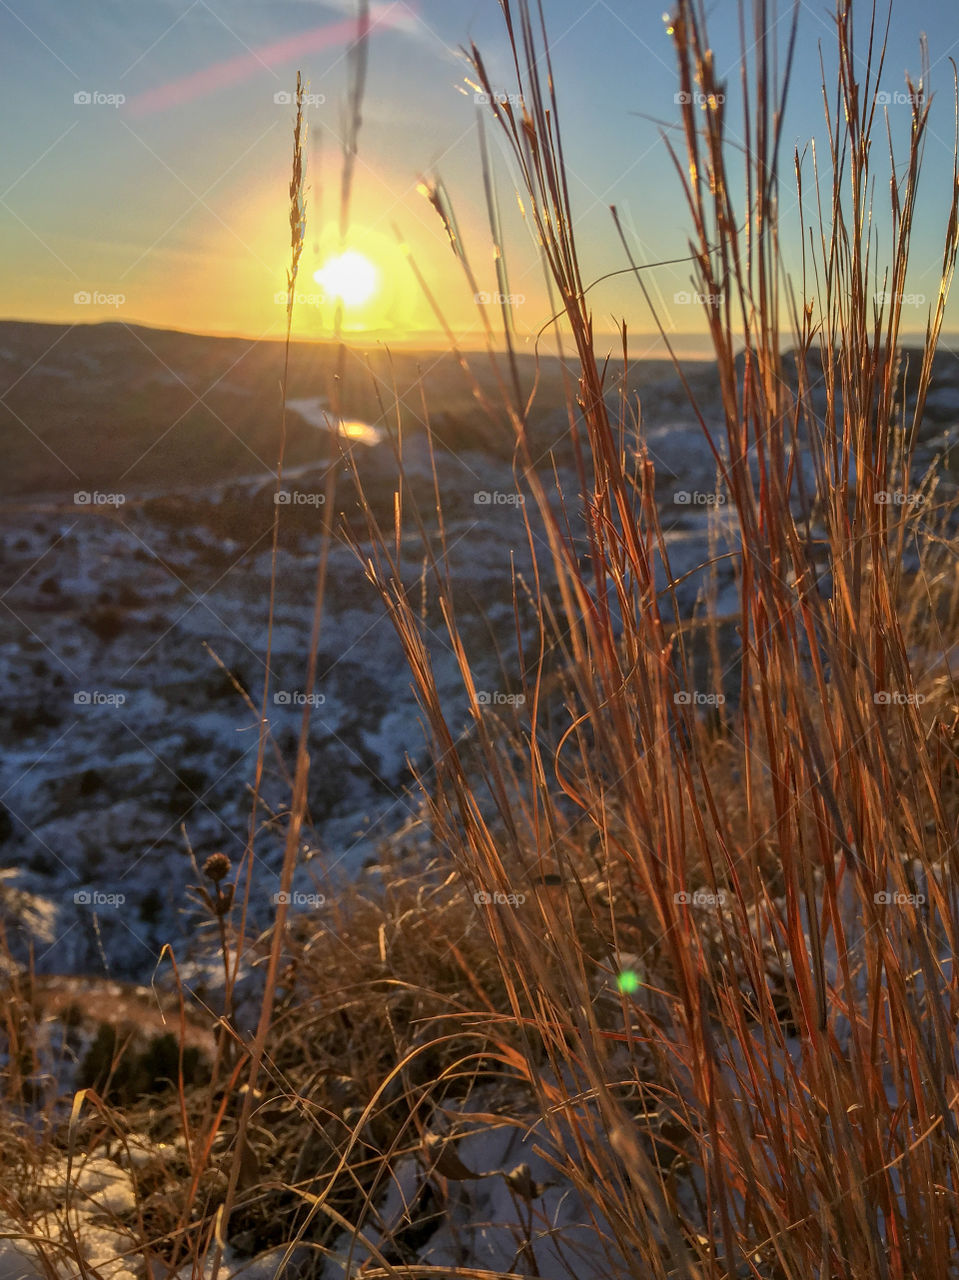 A frigid December 31st spent hiking in the North Dakota badlands at Theodore Roosevelt National Park. The day was super clear and the sunset overlooking the frozen landscape was breathtaking.